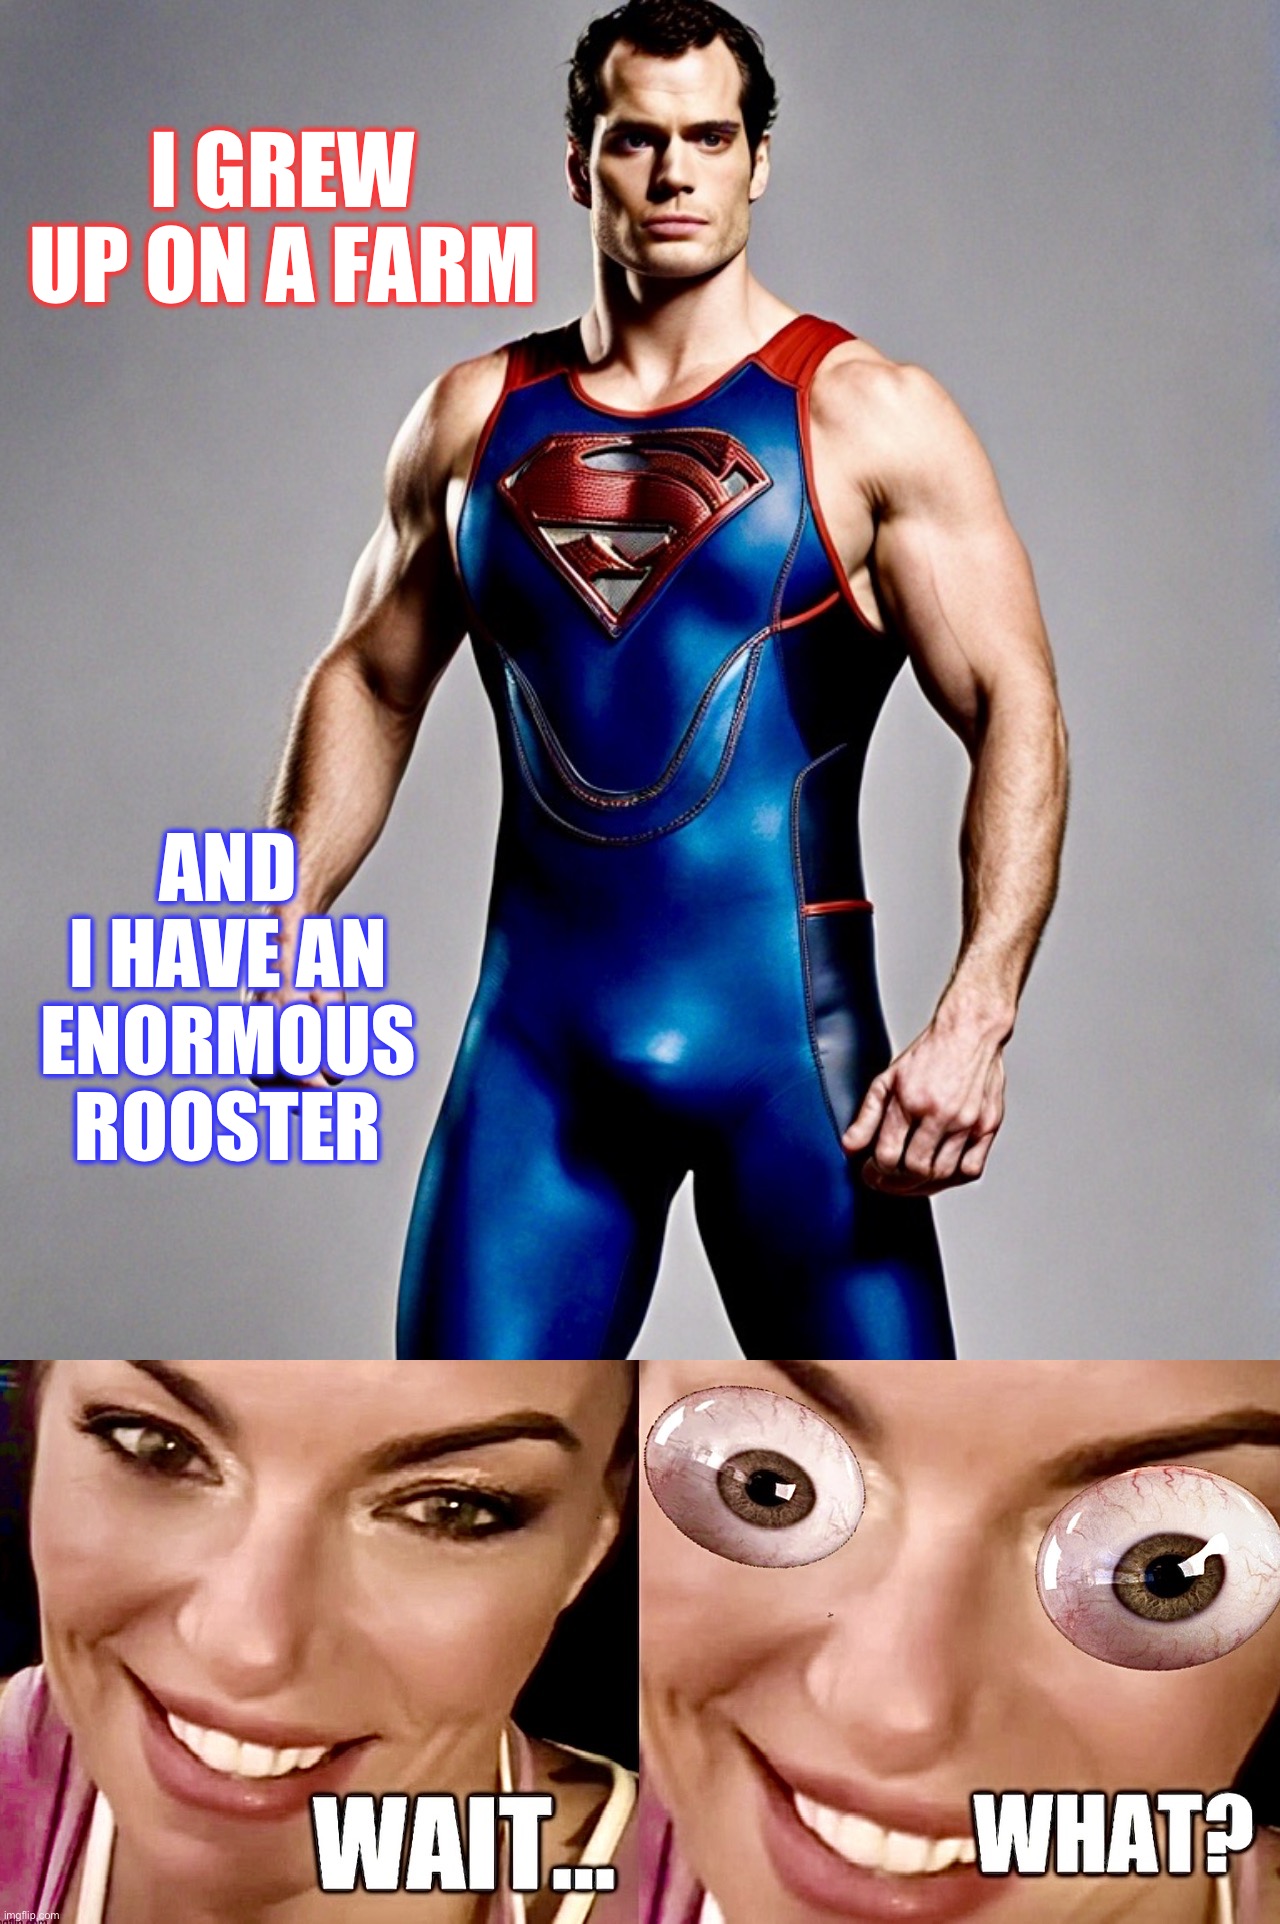 That rooster is henpecked | I GREW UP ON A FARM; AND I HAVE AN ENORMOUS ROOSTER | image tagged in superman,henry cavill,memes,rooster,wait what,man of steel | made w/ Imgflip meme maker